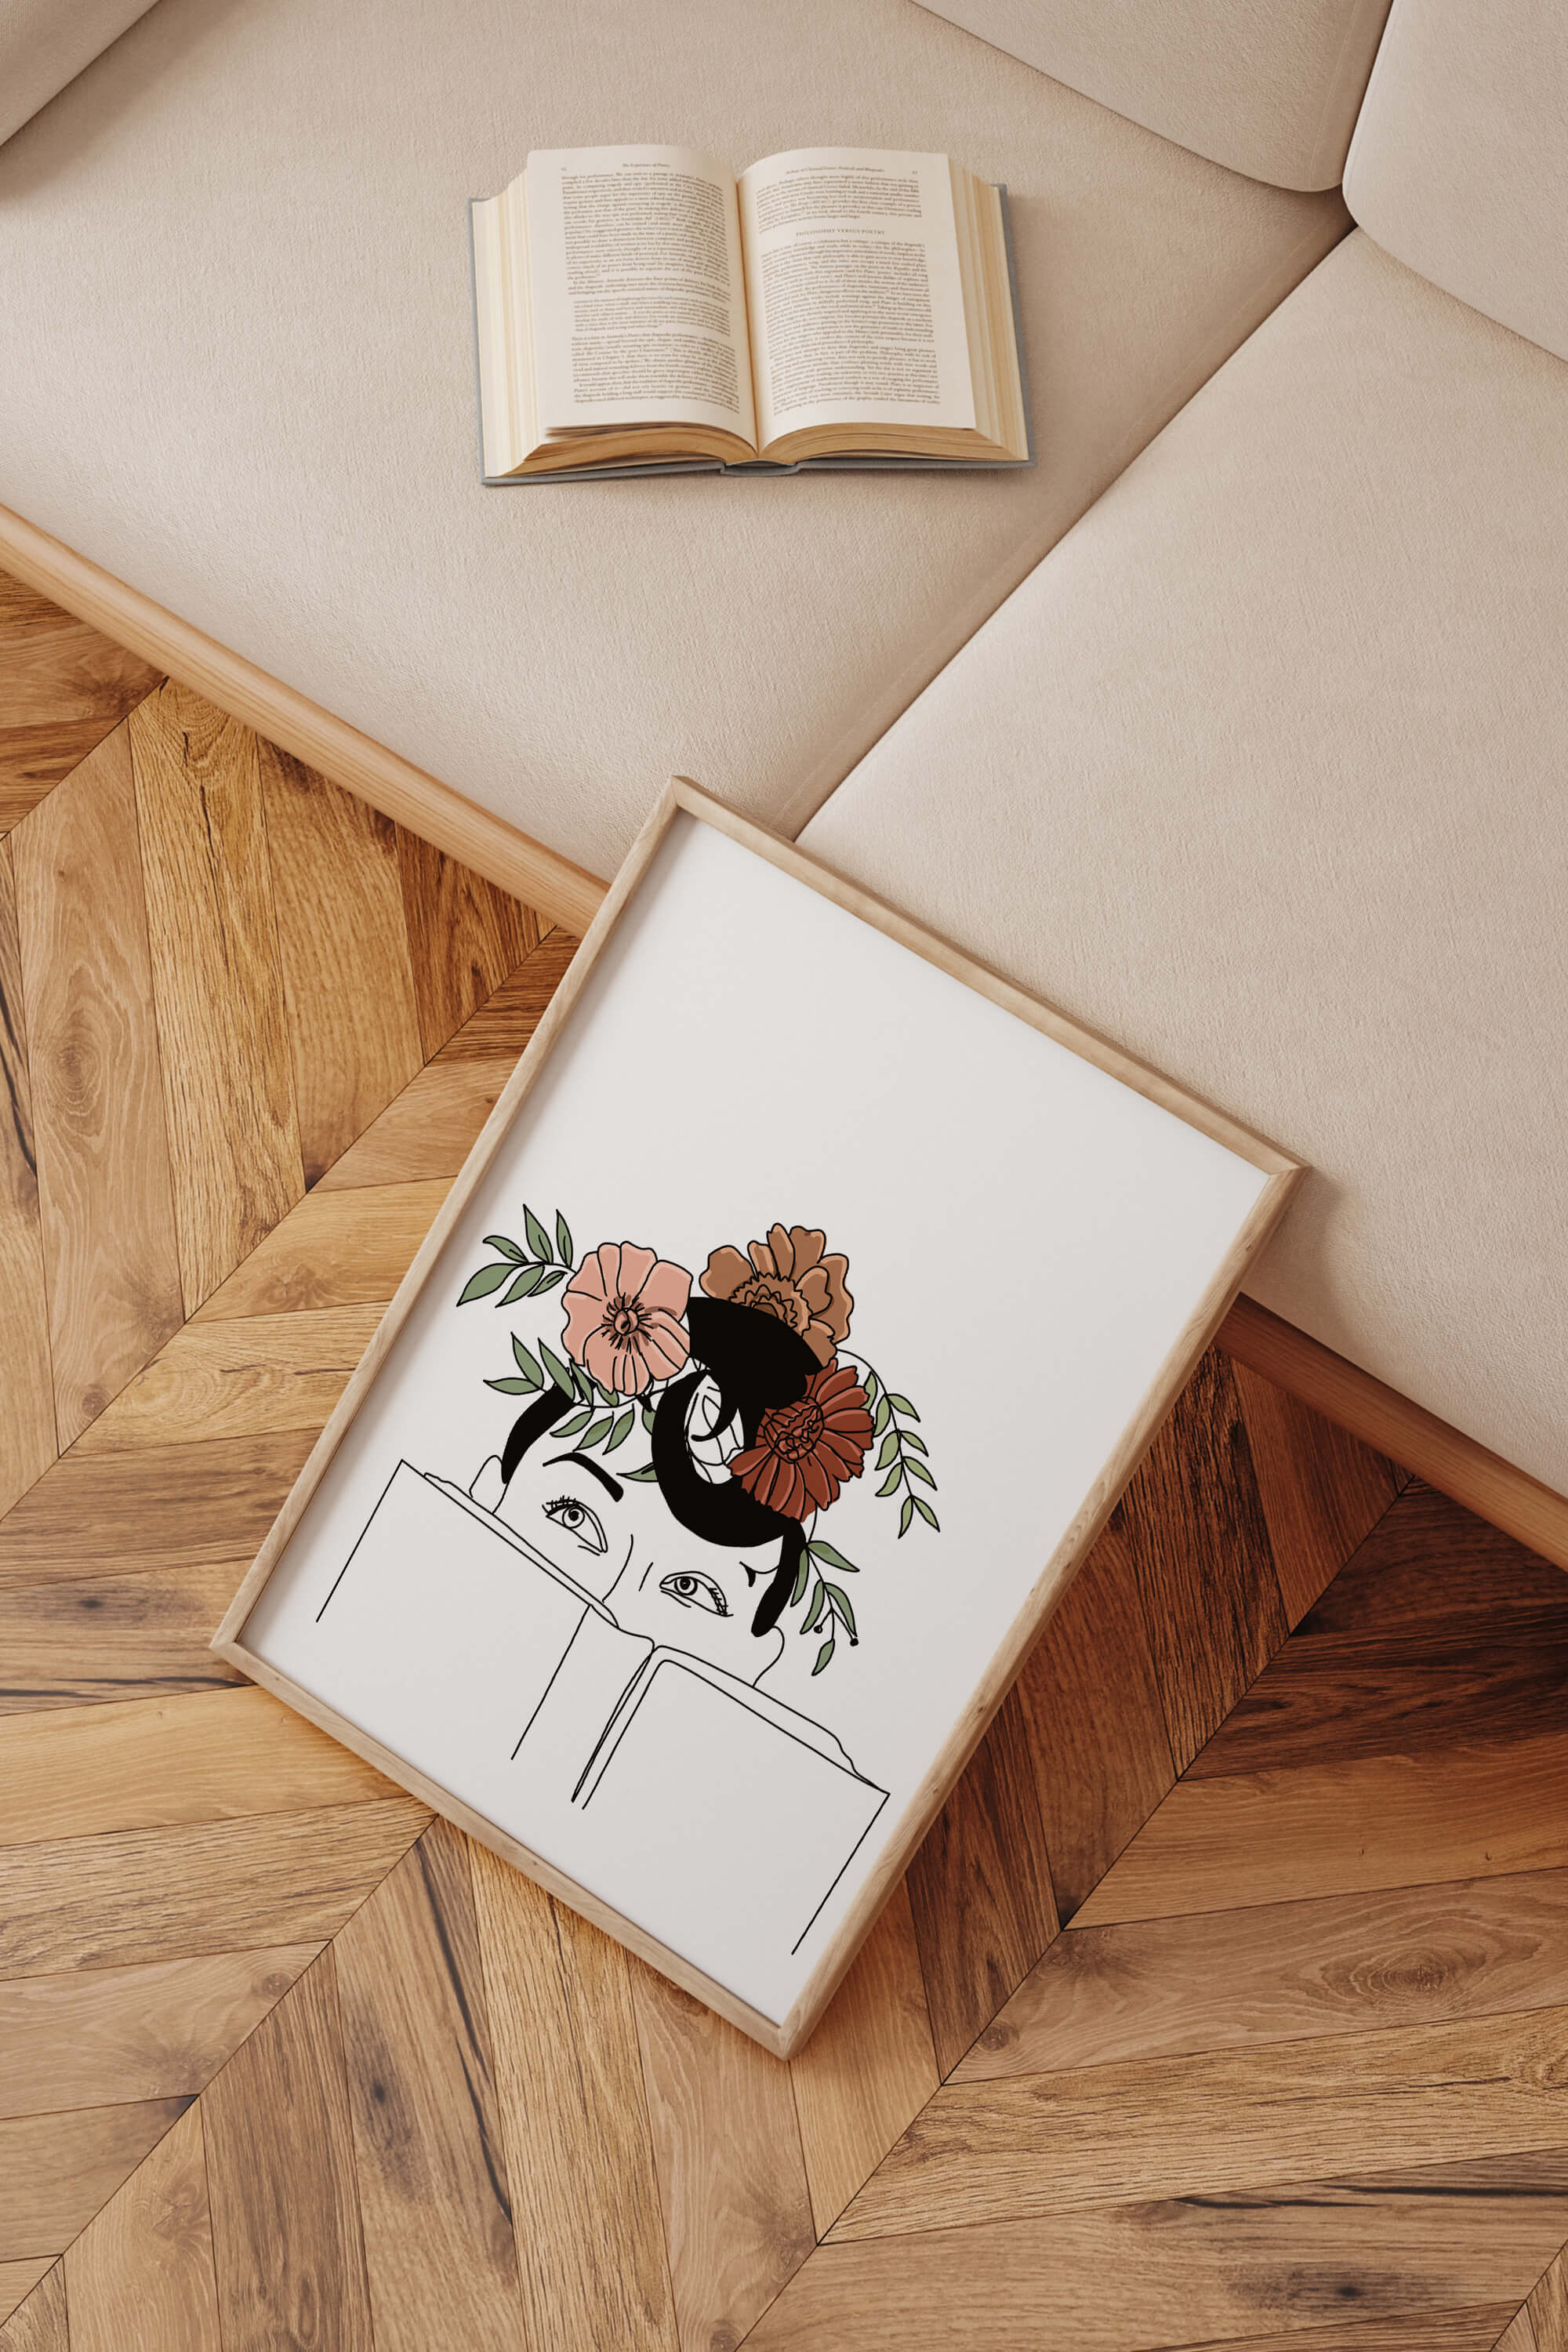 Botanical female portrait line art, capturing the tranquility of reading amidst nature, a sophisticated wall accent.